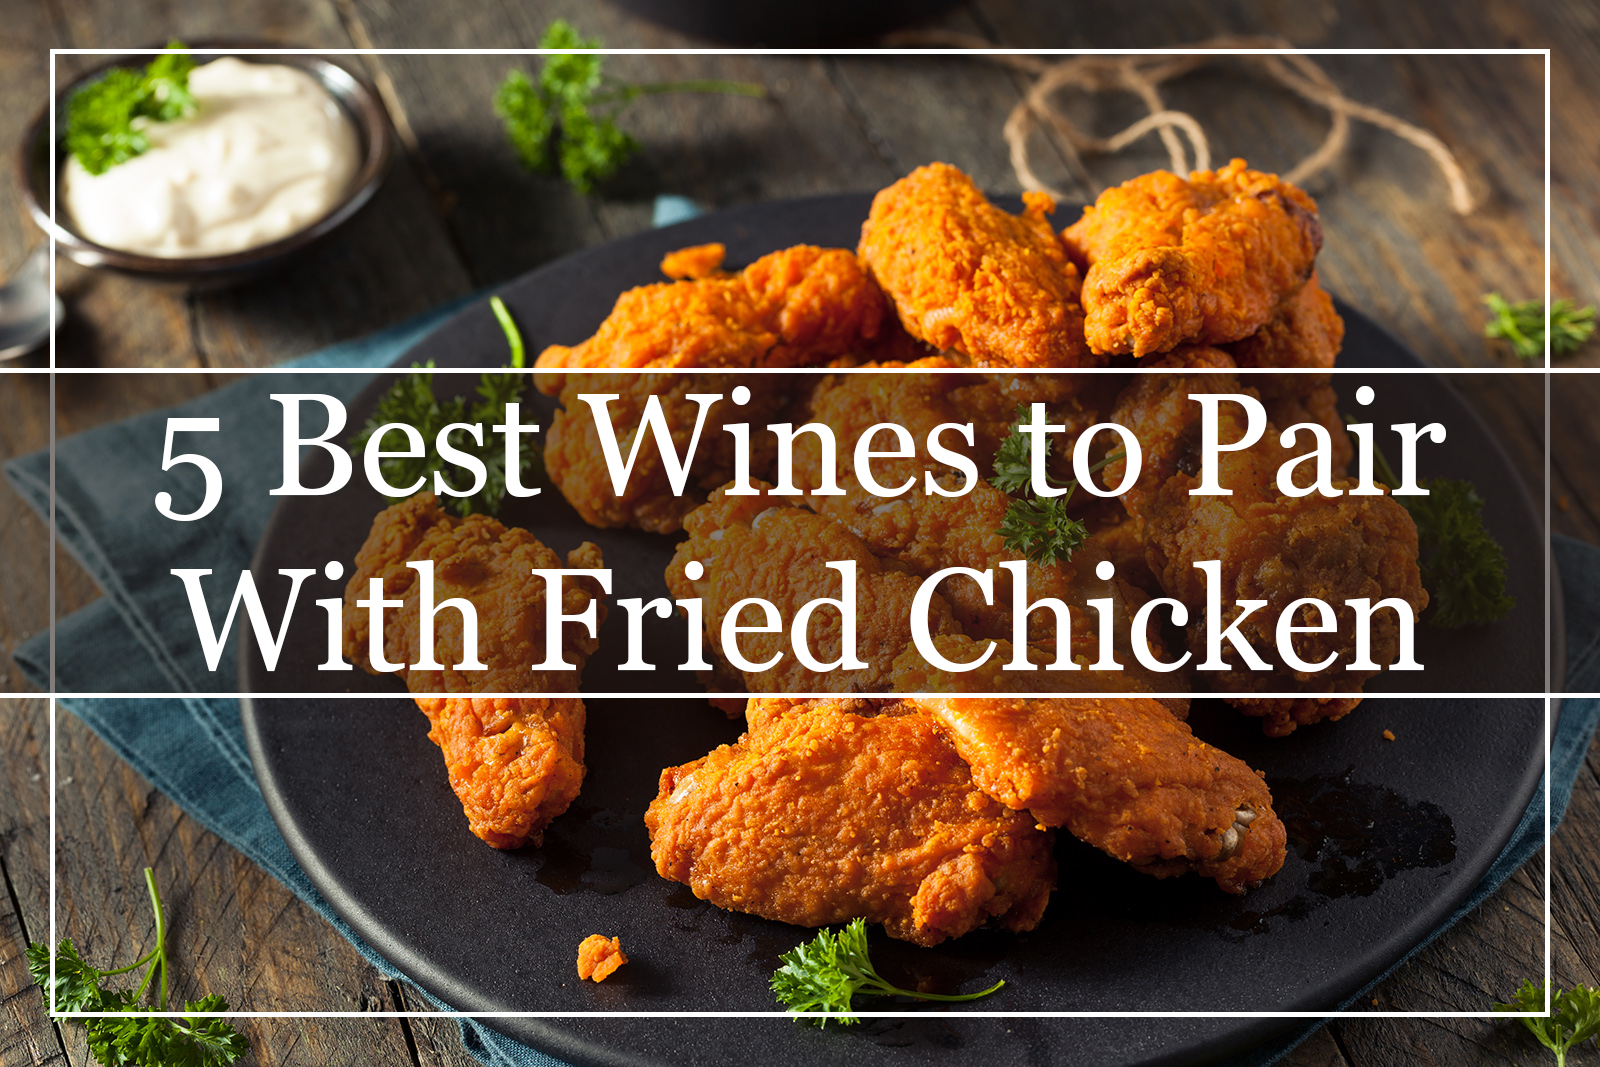 5 Best Wines to Pair With Fried Chicken